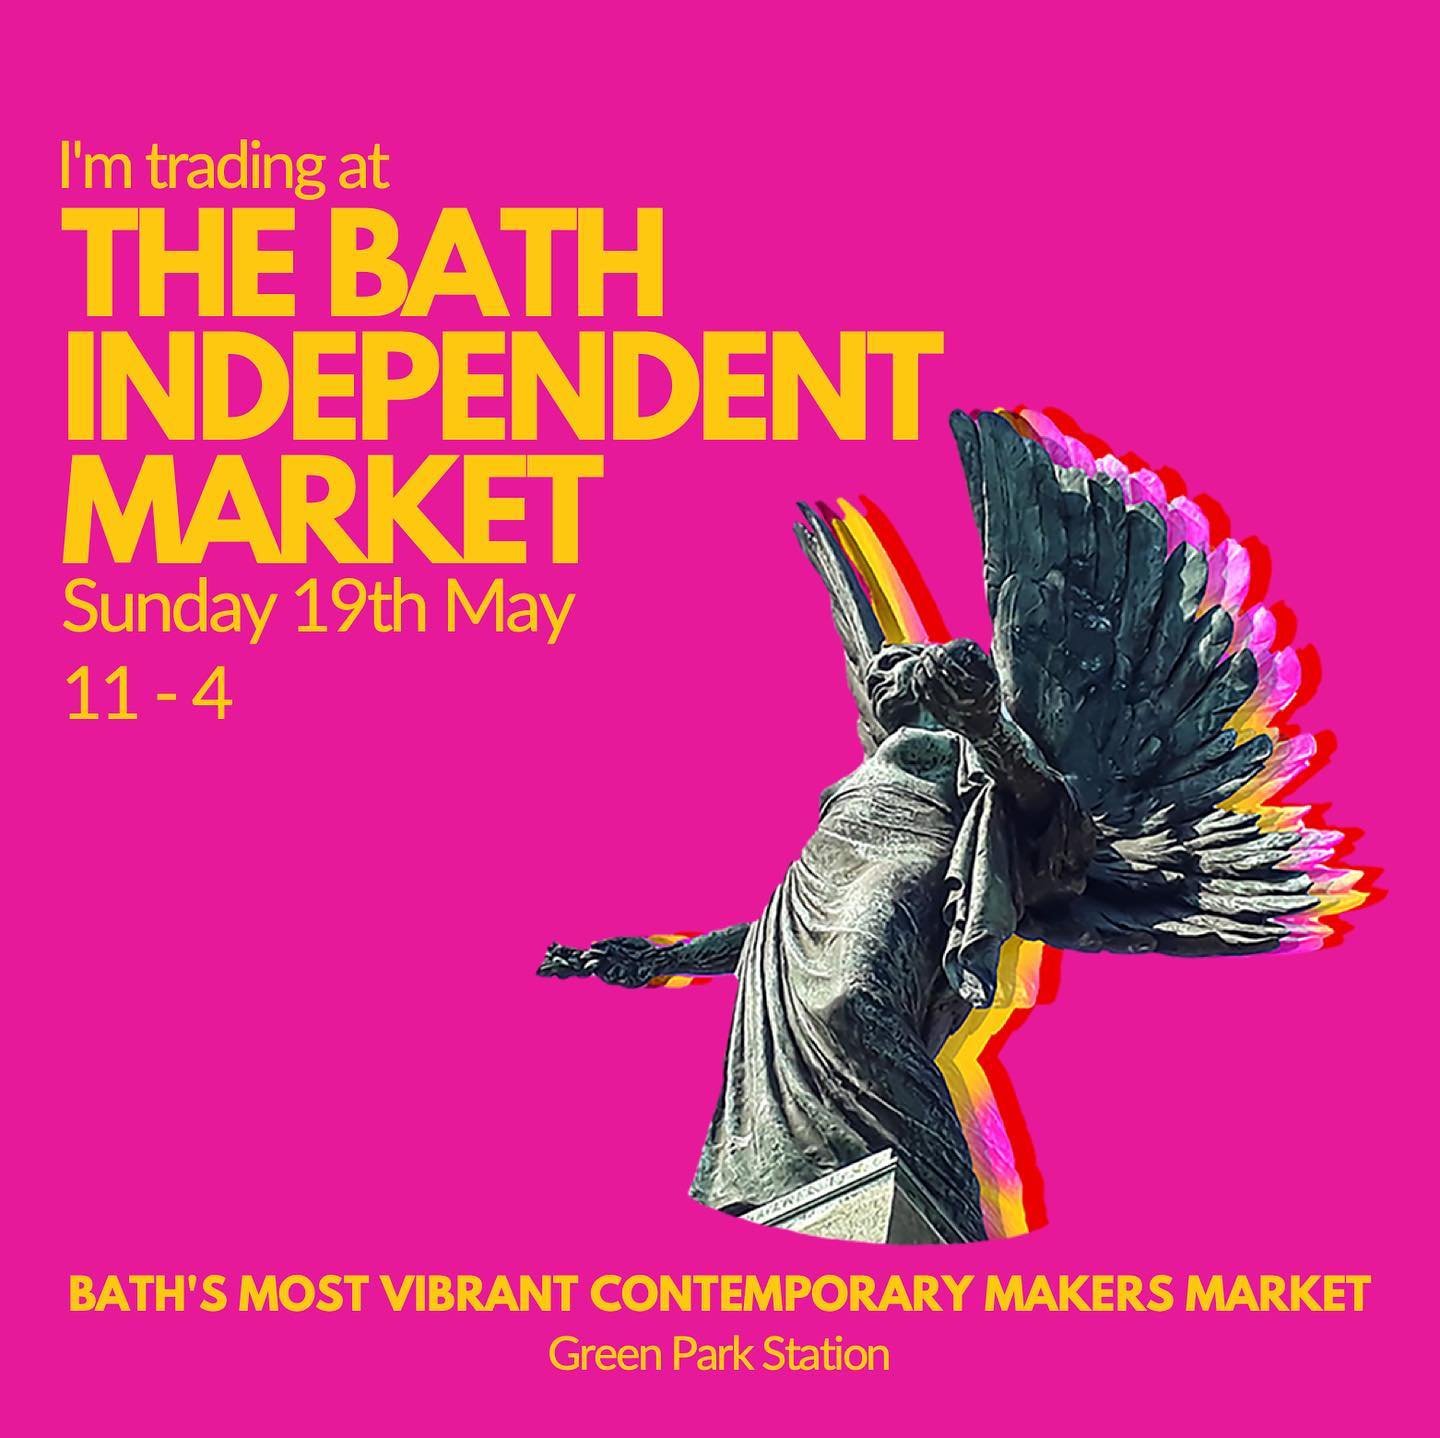 I&rsquo;ll be joining this vibrant community of makers on Sunday 19th May for The Bath Independent Market at Green Park Station. It would be great to see you there! #bathindependent #printmakersofinstagram #printmakingart #handboundbooks #handmadeboo